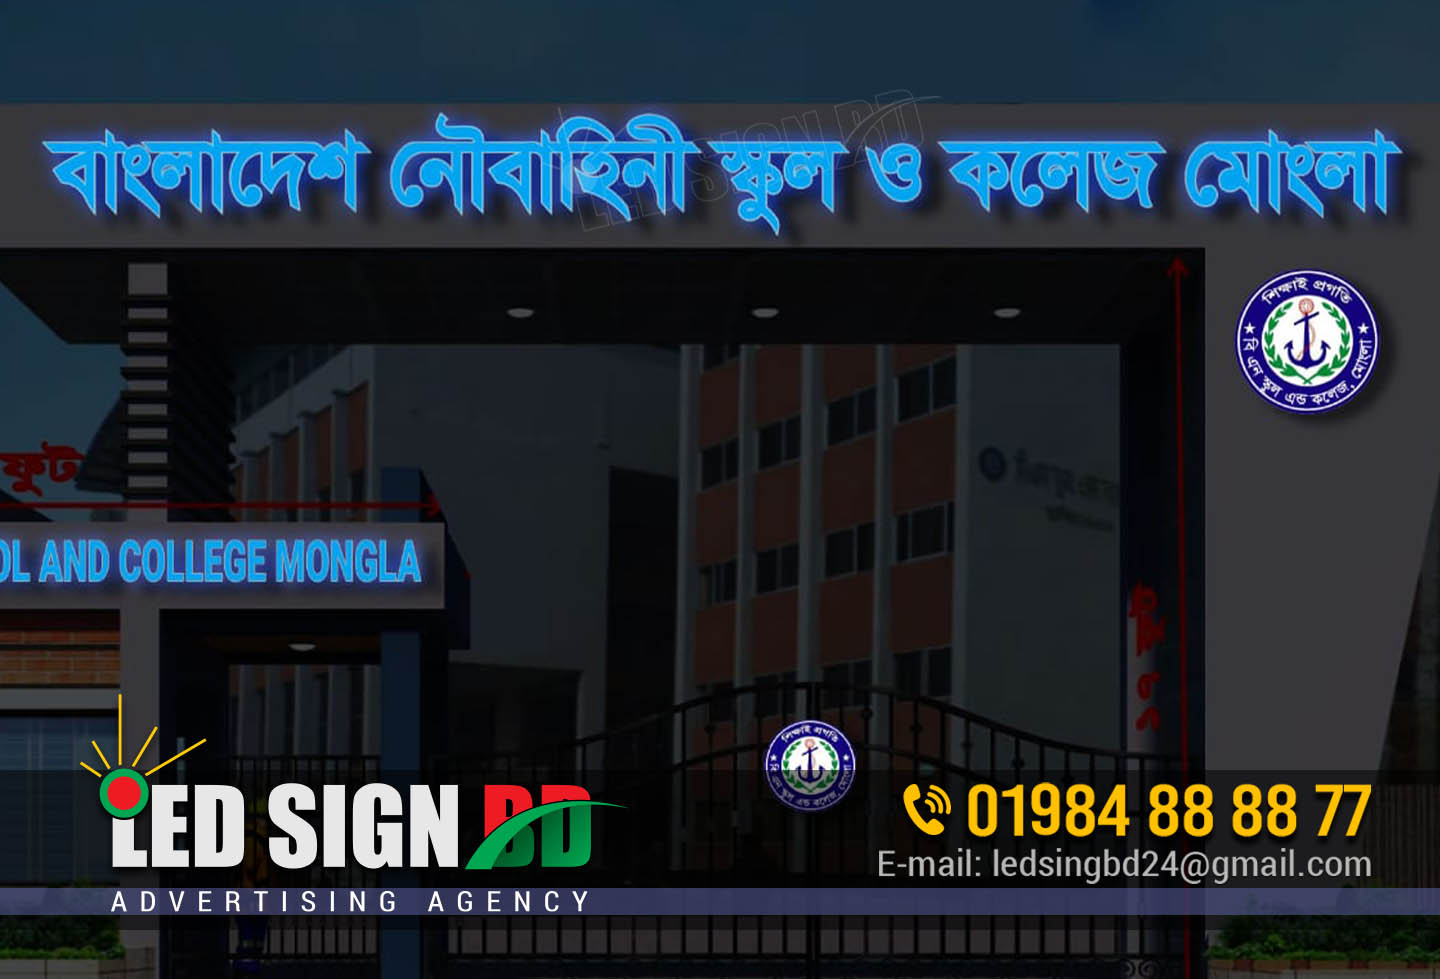 Stainless steel letter sign board making dhaka. Stainless steel letter sign board. Steel sign construction limited. Stainless steel letter board. Sign board design in bangladesh. Sign board dhaka. 3 stainless steel letter sign board making dhaka. 2 stainless steel letter sign board making dhaka. SS top letter bd pdf. SS top letter bd price. SS top letter bd font. SS top letter bd download. SS top letter bd pdf download. SS top letter bd. SS. steel limited bangladesh. SS steel ltd bd. SSB leather bd. Atylish name bd. Free fire name style 2020. Sign board price in bangladesh. PVC sign board price in bangladesh. Acrylic sign board price in bangladesh. Led sign board price in bangladesh. Neon sign board price in bangladesh. Sign board design in bangladesh. Digital sign board price in bangladesh. Lighting sign board price in bangladesh. Pvc sign board price in bangladesh. Plastic sign pvt ltd. Acrylic sign board price in bangladesh. Sign board design in bangladesh. Plastic association bangladesh. Plastic bottle sign. Golden ss. Golden stitch design ltd. SS gold letters. Golden stitch design limited. Golden line bd. Golden ss letter bd. Gold star shipping line bangladesh. Golden sons limited. Offset printing press machine price in banglades. Printing press price in bangladesh. Printing press bd. Dhaka printing press. Screen printing machine price in bangladesh. Digital printing company in bangladesh. Printing press services list. Printing & packaging company in bangladesh. Wall poster price in bangladesh. Wall poster bd. Printing press in bangladesh. 10 wall printing press in bangladesh. 2 wall printing press in bangladesh. Wall paper price in bangladesh. Wasa logo png. Wasa logo signboard and letter signboard. Wasa logo logo signboard * and letter signboard. Nameplate of house. Name plate design for home bangladesh. House name plate design in bangladesh. Building name plate design. Signage bd. Electronic sign board. Digital sign board in dhaka. Good sign bangladesh. Gigital display board price in bangladesh. Neon signboard. College sign board. Sign board dhaka. Signboard background color. Signboard bd. project sign board design. Letter sign board design. Sign board design in bangladesh. Letter board design. Government monogram bangladesh. Gov monogram.. Project signboard template. Gob logo png. Government project job. Government letter format in bangladesh. Gob logo. Neon sign price in bangladesh. Bangladesh neon sign. Led sign board in bangladesh. Led sign board price in bangladesh. Sign board design in bangladesh. pvc sign board price in bangladesh. Signage bd. Acrylic sign board price in bangladesh. Neon sign price in bangladesh. Bangladesh neon sign. Led sign board in bangladesh. Led sign board price in bangladesh. Sign board design in bangladesh. Neon sign board. ................................................................................ Signboard Advertising Agency in Dhaka Signboard Advertising Agency has been in business for over 20 years, serving the Dhaka community with high-quality signboard advertising. The agency is owned and operated by Mr. Shafiqul Alam, who has extensive experience in the signboard advertising industry. Signboard Advertising Agency offers a wide range of services, including design, fabrication, installation, and maintenance of signboards. The agency has a team of highly skilled and experienced professionals who are dedicated to providing the best possible service to their clients. The Signboard Advertising Agency is committed to providing its clients with the highest quality signboard advertising solutions. The agency’s team of experienced professionals is dedicated to providing the best possible service to its clients. The Signboard Advertising Agency has a reputation for providing high-quality signboard advertising solutions at a reasonable price. 1. What is Signboard Advertising Agency? 2. What services does Signboard Advertising Agency offer? 3. What are the benefits of Signboard Advertising Agency? 4. How does Signboard Advertising Agency work? 5. Why choose Signboard Advertising Agency? 1. What is Signboard Advertising Agency? A signboard advertising agency, also known as an outdoor advertising agency, is a company that specializes in creating, planning, and executing outdoor advertising campaigns. Signboard advertising agencies are experts in understanding how to use various outdoor advertising formats to achieve a client's marketing objectives. While the term "signboard advertising agency" is most commonly used to refer to companies that specialize in outdoor advertising, there are also a number of full-service advertising agencies that offer outdoor advertising as one of their many services. In these cases, the outdoor advertising team within the agency works collaboratively with other teams, such as the media buying team, to ensure that the client's overall marketing objectives are met. If you're considering working with a signboard advertising agency to help promote your business, there are a few things you should keep in mind. First, it's important to find an agency that has experience planning and executing successful outdoor advertising campaigns. Second, you'll want to make sure that the agency you work with has a good understanding of the different types of outdoor advertising formats and knows how to use them effectively. And finally, you'll want to choose an agency that you feel comfortable working with and that you can trust to provide honest and objective feedback about your campaigns. 2. What services does Signboard Advertising Agency offer? Signboard Advertising Agency is a full-service advertising agency that offers a wide range of services to its clients. The agency has a team of experienced professionals who are experts in various fields of advertising and marketing. The agency provides comprehensive services that include market research, media planning and buying, creative development, and production. The agency has a wide range of experience in handling different types of advertising campaigns. It has worked with a number of leading brands and has successful campaigns to its credit. The agency prides itself on its ability to understand the client’s needs and create effective campaigns that deliver results. The agency offers a complete package of services that are designed to meet the specific needs of the client. The services offered by the agency include market research, media planning and buying, creative development, production, and post-production. The agency has a team of experienced professionals who are experts in different fields of advertising and marketing. The agency has a wide range of experience in handling different types of advertising campaigns. It has worked with a number of leading brands and has successful campaigns to its credit. The agency prides itself on its ability to understand the client’s needs and create effective campaigns that deliver results. 3. What are the benefits of Signboard Advertising Agency? There are many benefits of Signboard Advertising Agency. The first benefit is that it helps to create brand awareness. A well-designed signboard will attract attention and help to create a memorable impression of your business. It can also help to build brand recognition, making it easier for potential customers to find your business when they are looking for what you offer. Another benefit of signboard advertising is that it can help to drive foot traffic. If your signboard is placed in a strategic location, it can help to draw people into your business. This can be especially effective for businesses that are located in busy areas or near other attractions. Signboard advertising can also be a cost-effective way to advertise. compared to other forms of advertising, signboards are relatively inexpensive to produce and can be placed in a variety of locations. This makes them an ideal option for businesses of all sizes. Finally, signboard advertising can be a effective way to reach a local audience. Signboards are often seen by people who live or work near by, making them a great way to target a specific group of people. Overall, signboard advertising is an effective way to promote your business. It can help to create brand awareness, drive foot traffic, and reach a local audience. 4. How does Signboard Advertising Agency work? Signboard Advertising Agency is a full-service advertising agency that offers a wide range of services to its clients. The agency has a team of experienced professionals who work closely with their clients to understand their requirements and develop creative and effective solutions that meet their objectives. The agency offers a complete range of services that includes market research, media planning and buying, creative development, and production. The agency also offers a wide range of digital marketing services that includes search engine optimization, social media marketing, and email marketing. The agency has a team of experienced professionals who are well-versed in the latest advertising trends and technologies. The agency has a proven track record of delivering successful campaigns for its clients. The agency works closely with its clients to understand their business goals and develop campaigns that are designed to achieve those objectives. 5. Why choose Signboard Advertising Agency? There are many reasons to choose Signboard Advertising Agency as your advertising agency in Dhaka. We offer a wide range of services that can help you get the most out of your advertising budget. Our team of experienced professionals will work with you to create a customized advertising campaign that fits your budget and meets your specific marketing goals. We will also provide you with a free initial consultation to help you determine the best way to reach your target audience. In addition to our traditional advertising services, we also offer web design, search engine optimization (SEO), and social media marketing services. We can help you create a website that is optimized for search engines and attract new customers through social media. We are committed to providing our clients with the highest quality service possible. We will work closely with you to ensure that your advertising campaign is a success. Contact us today to learn more about our agency and how we can help you grow your business. Signboard Advertising Agency in Dhaka is one of the most popular and affordable advertising agencies in the city. They offer a wide range of services and have a team of experienced professionals who can help you create the perfect marketing campaign for your business.